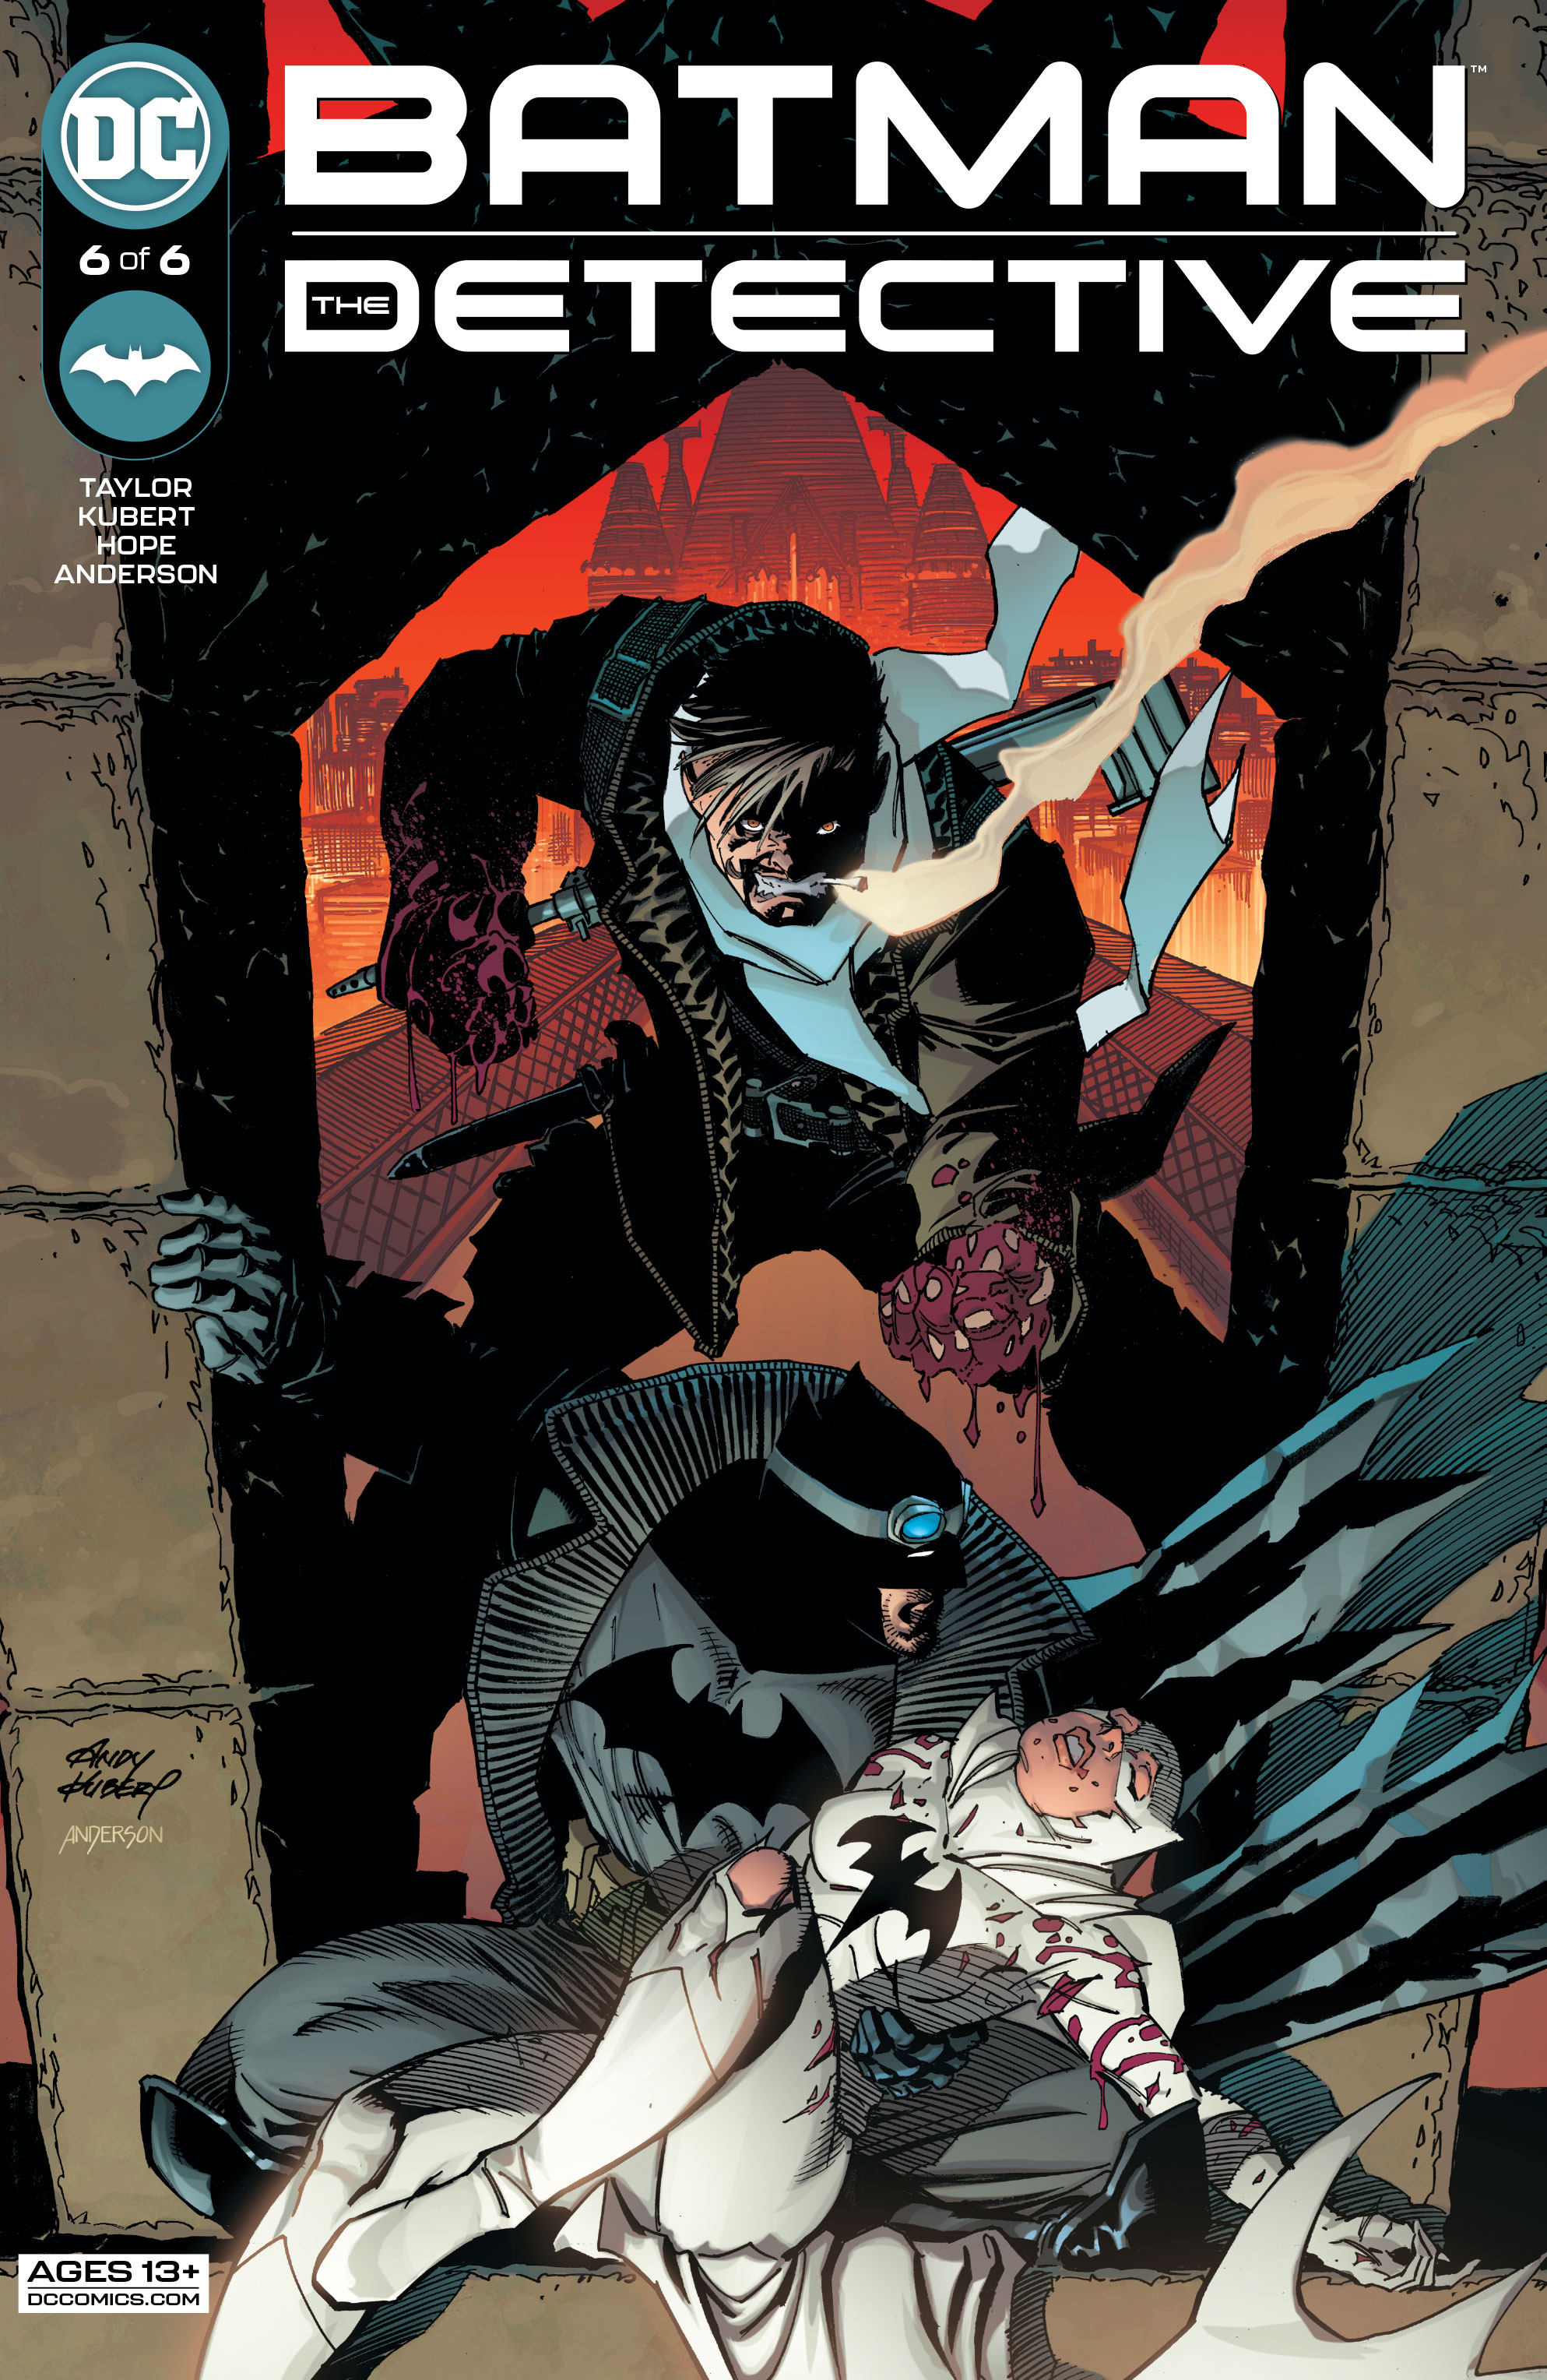 Batman The Detective #6 Cover A Andy Kubert (Of 6)